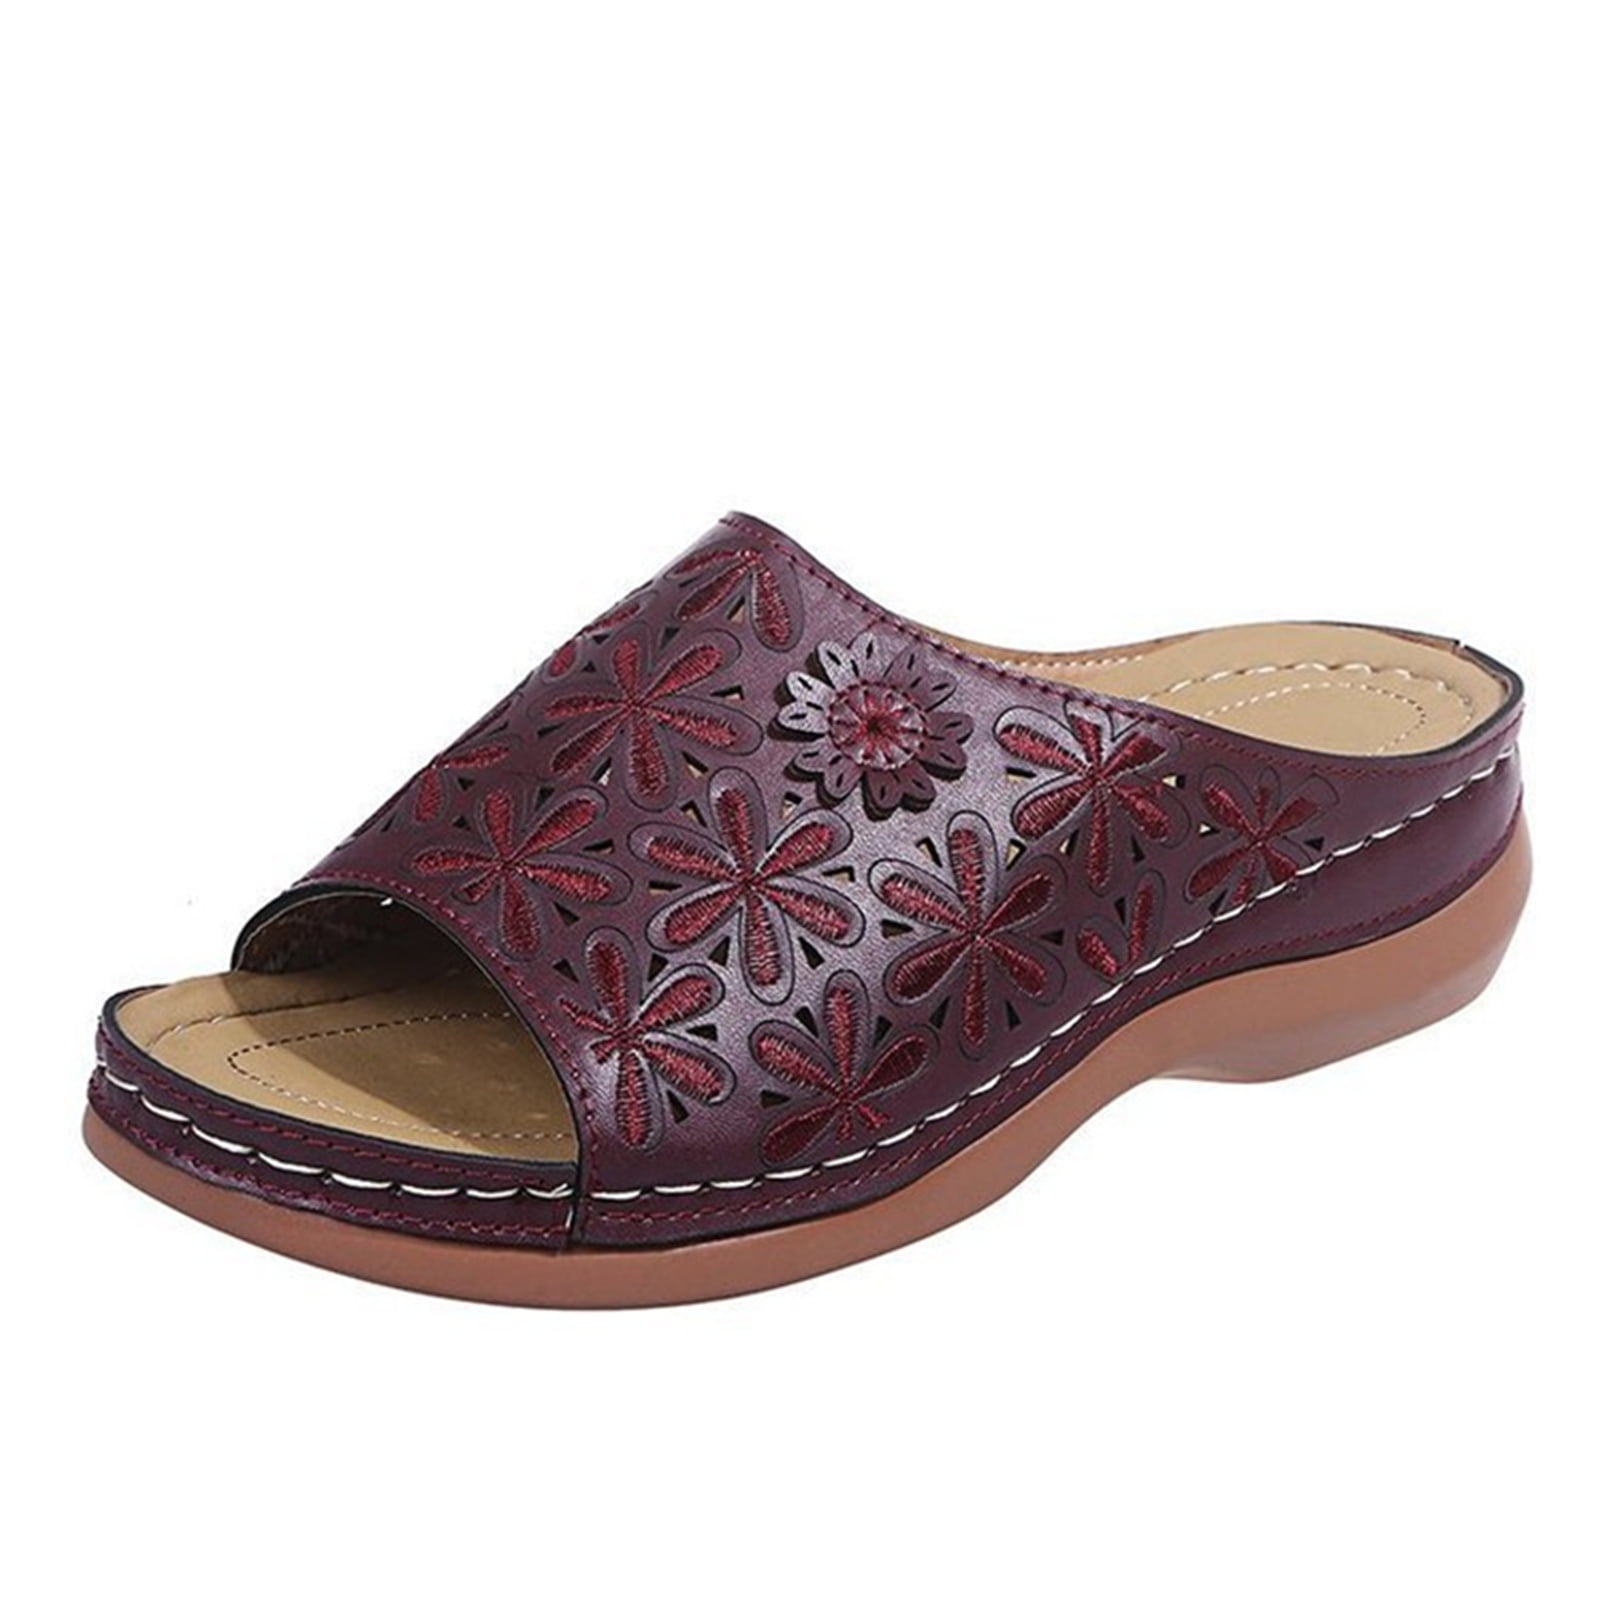 Leather Soft Footbed Orthopedic Arch Support Sandals for Women ...